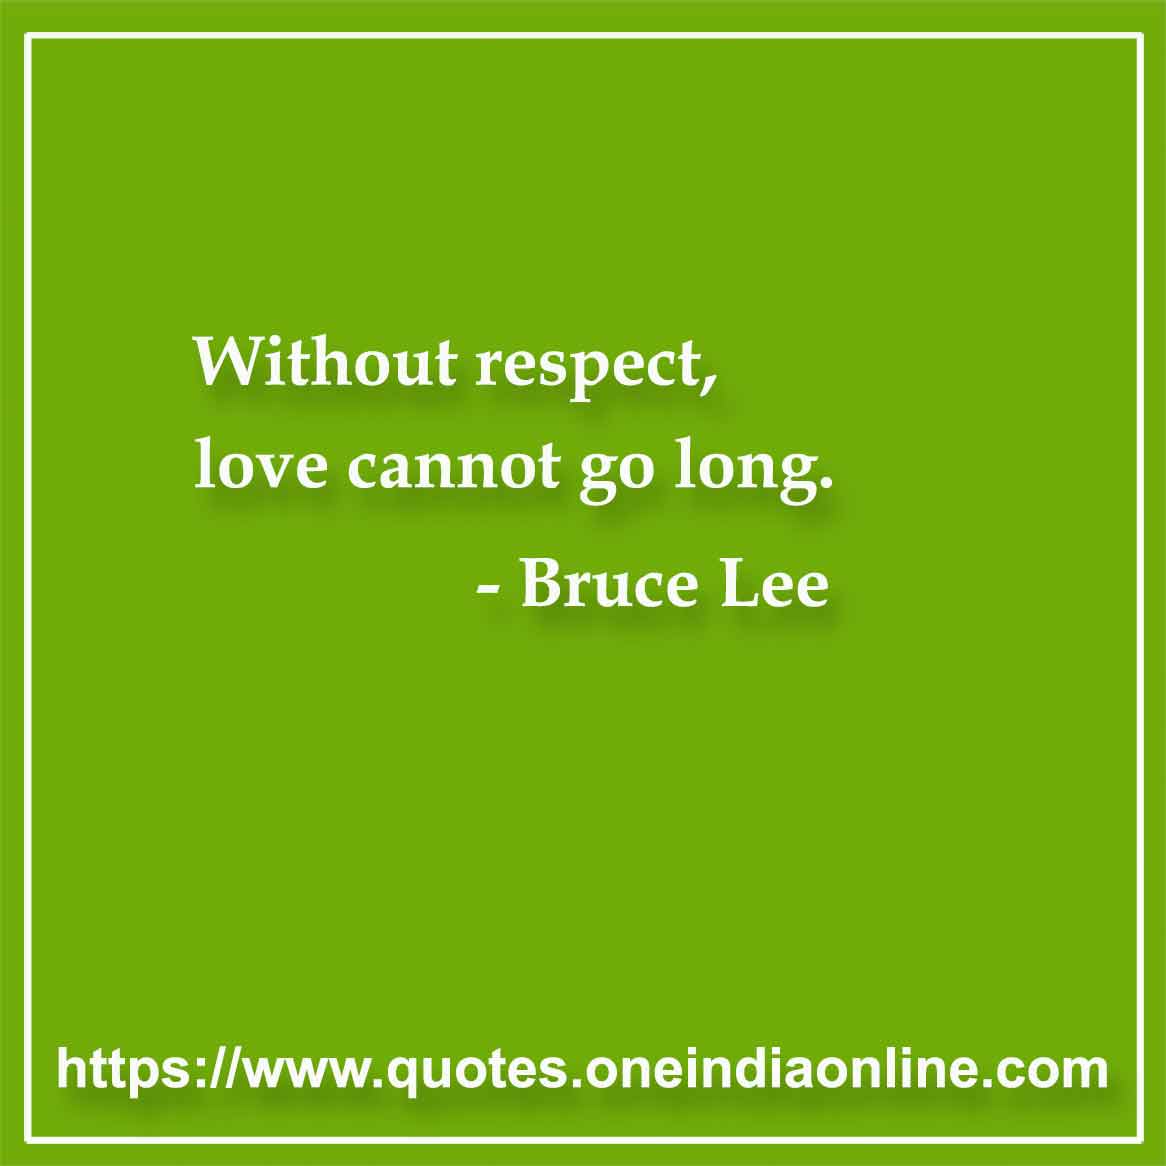 Without respect, love cannot go long.